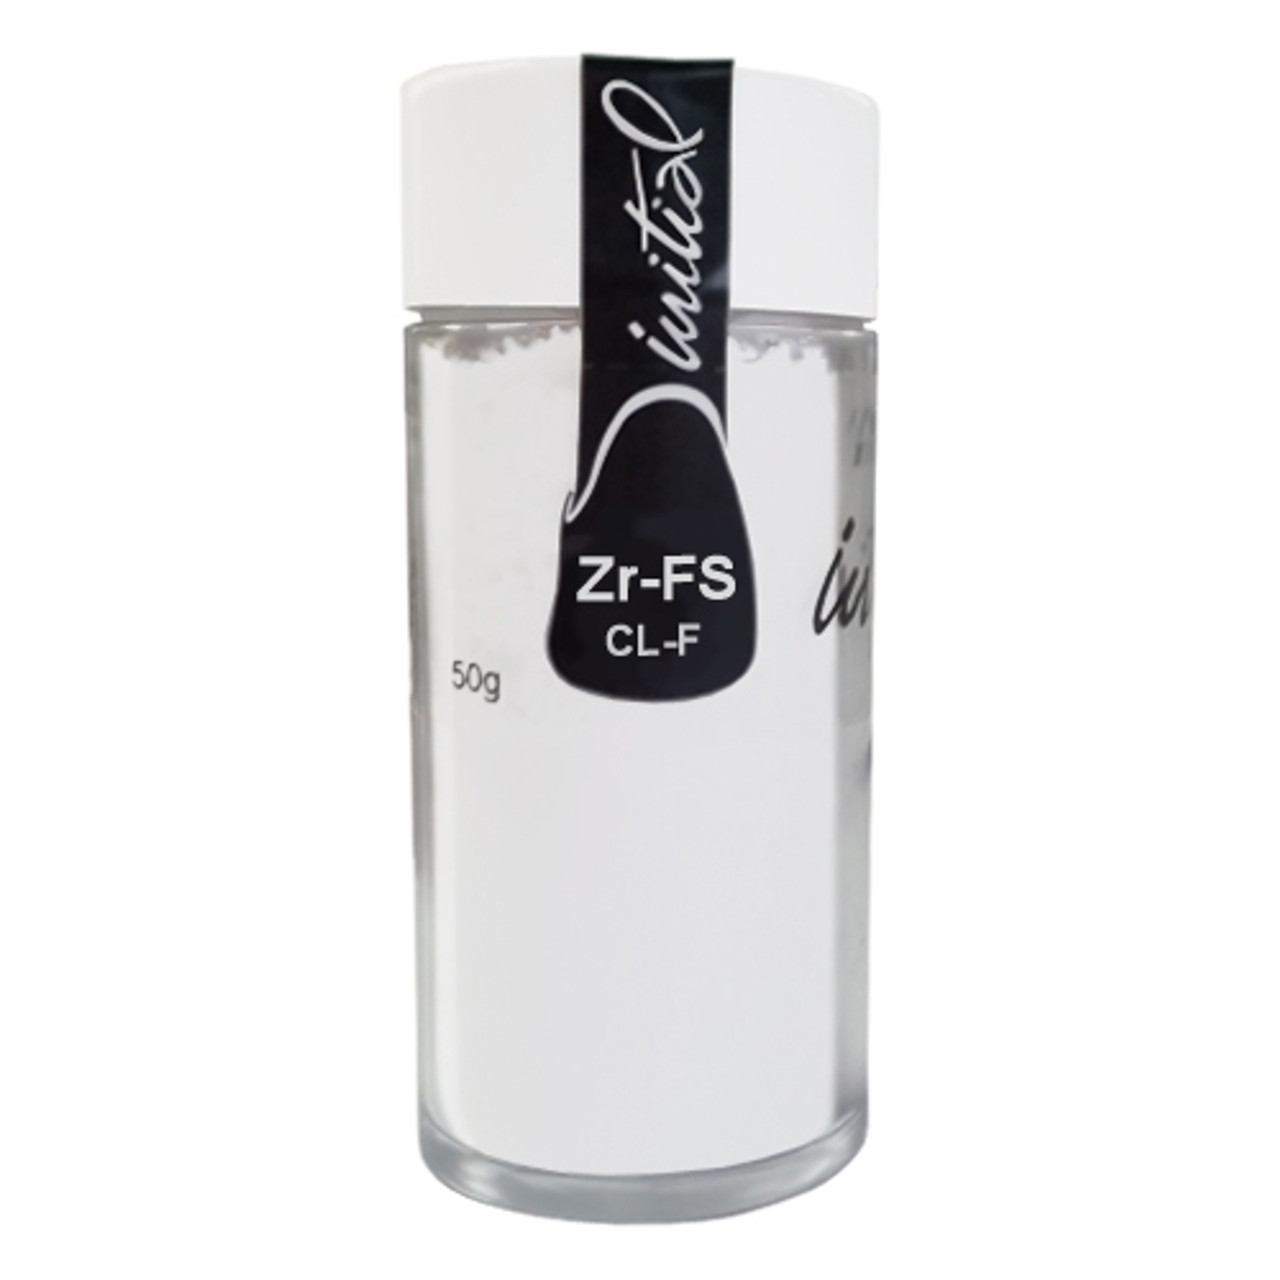 Initial Zr Clear Fluorescence CL-F, 50g, GC America, 875571